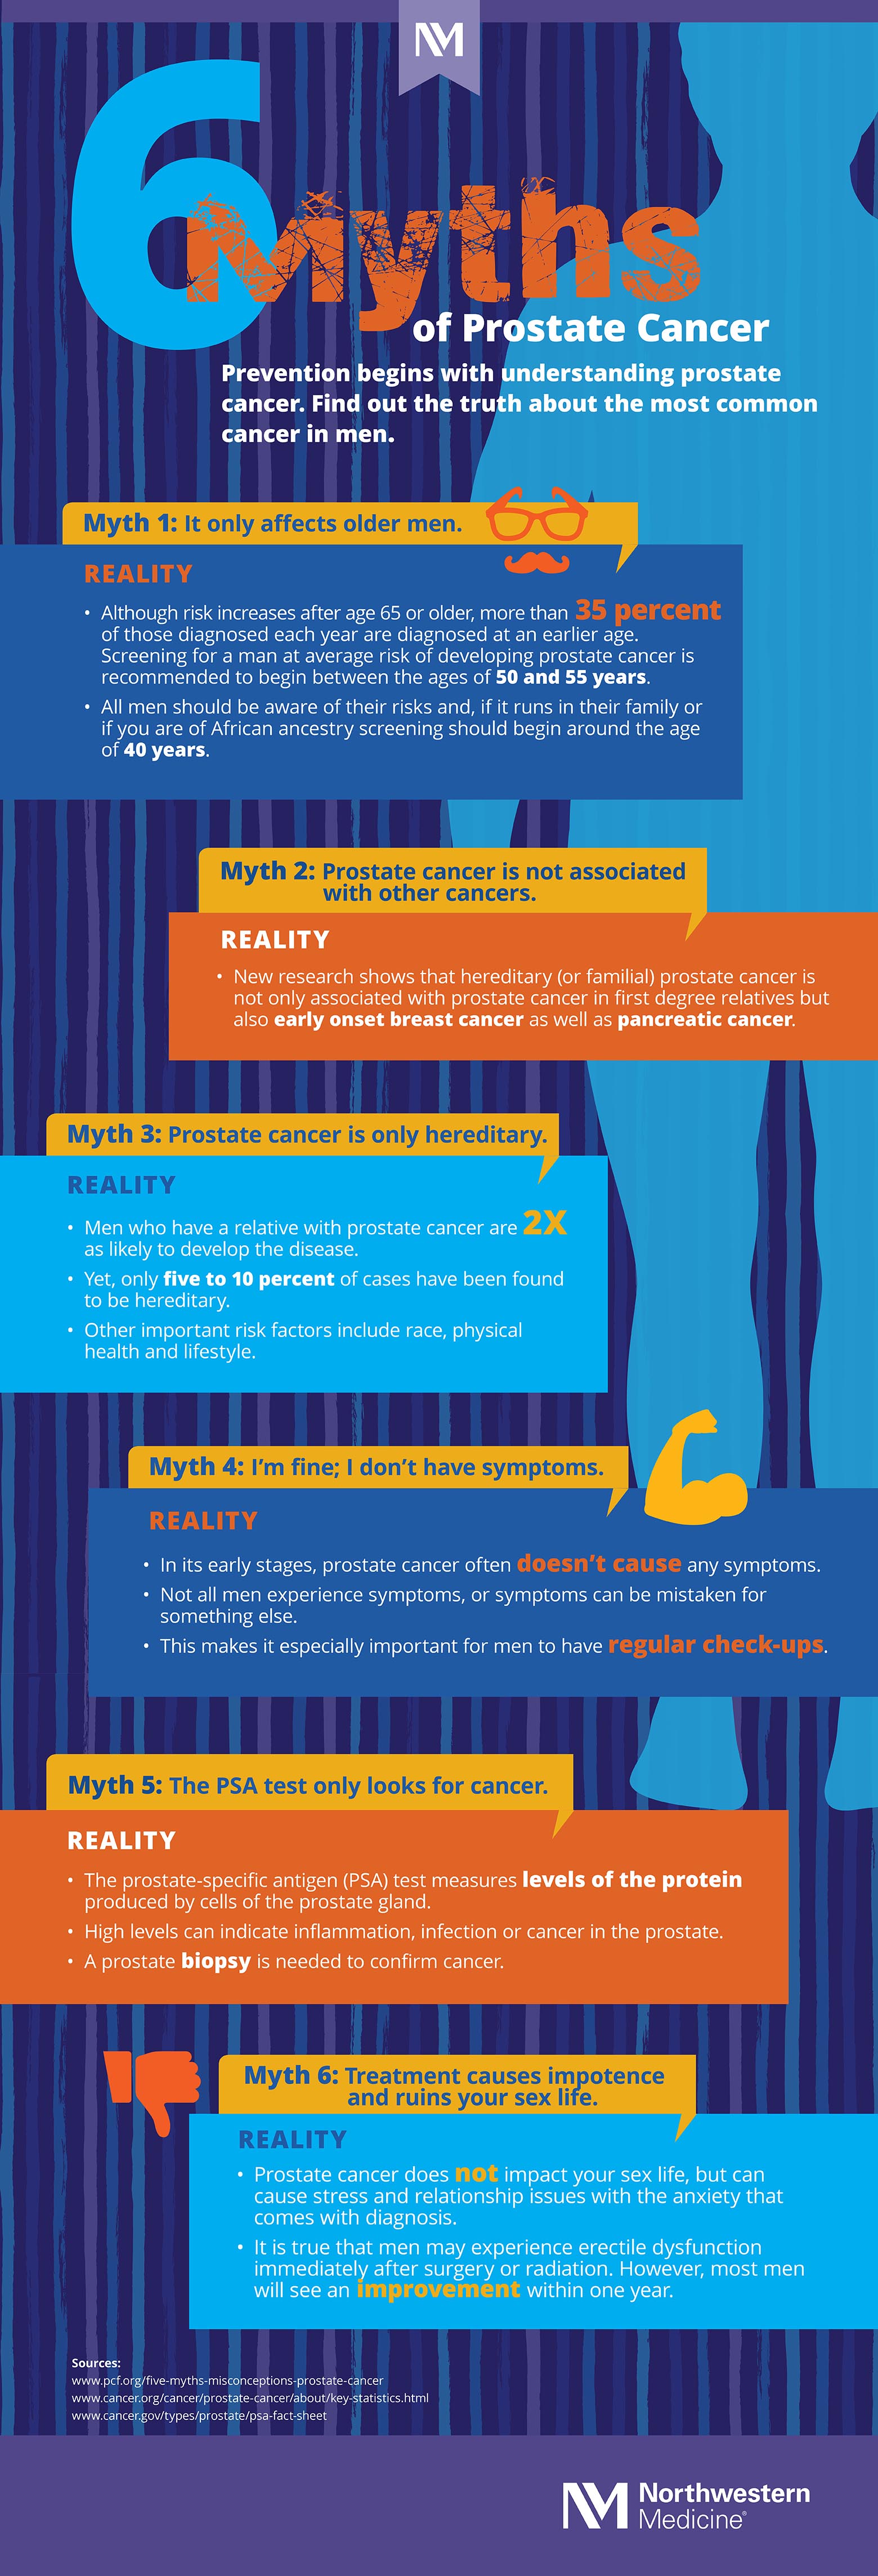 18-2221 Prostate Myths_Infographic-FINAL